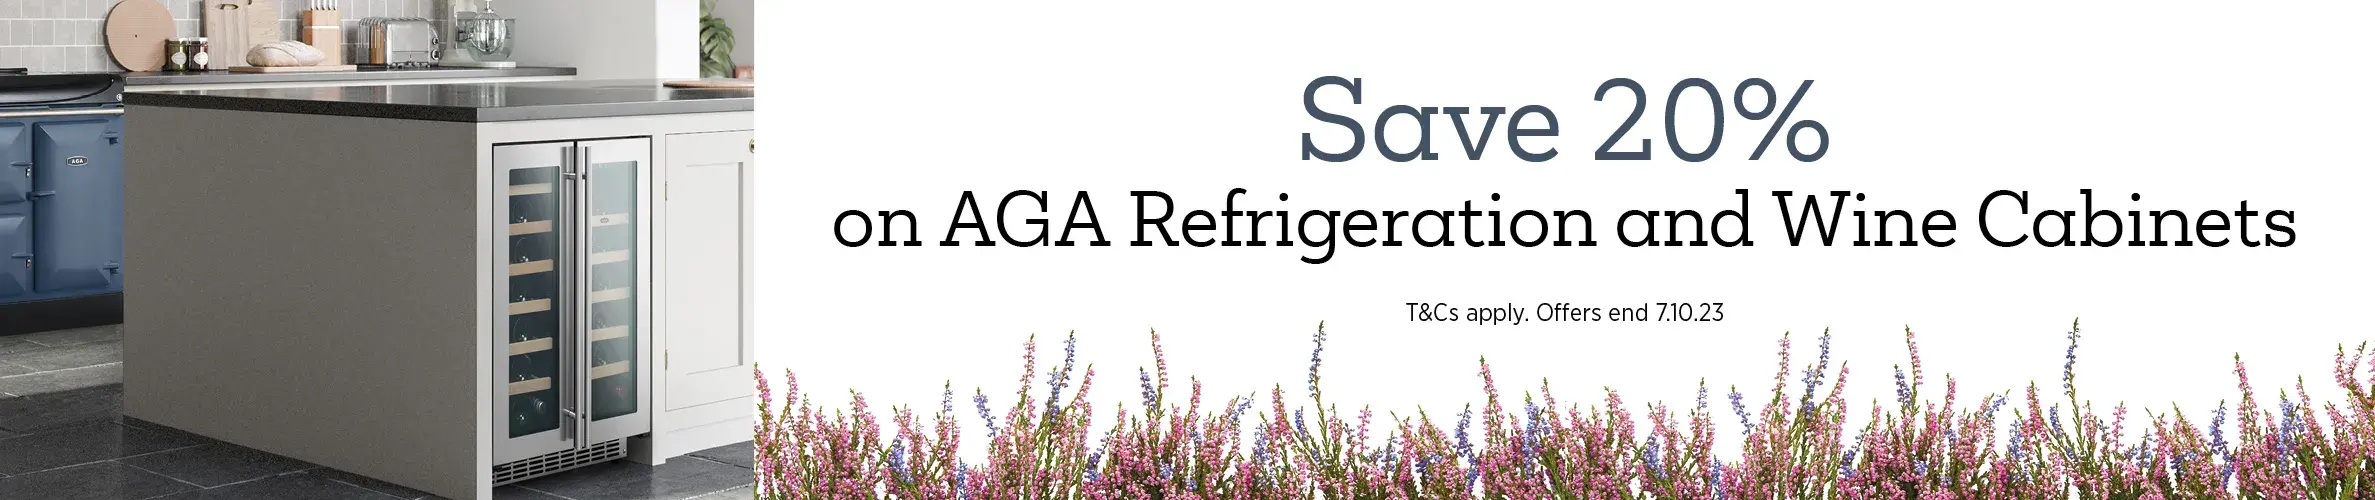 Save 20% off AGA Refrigeration and Wine Cabinets 